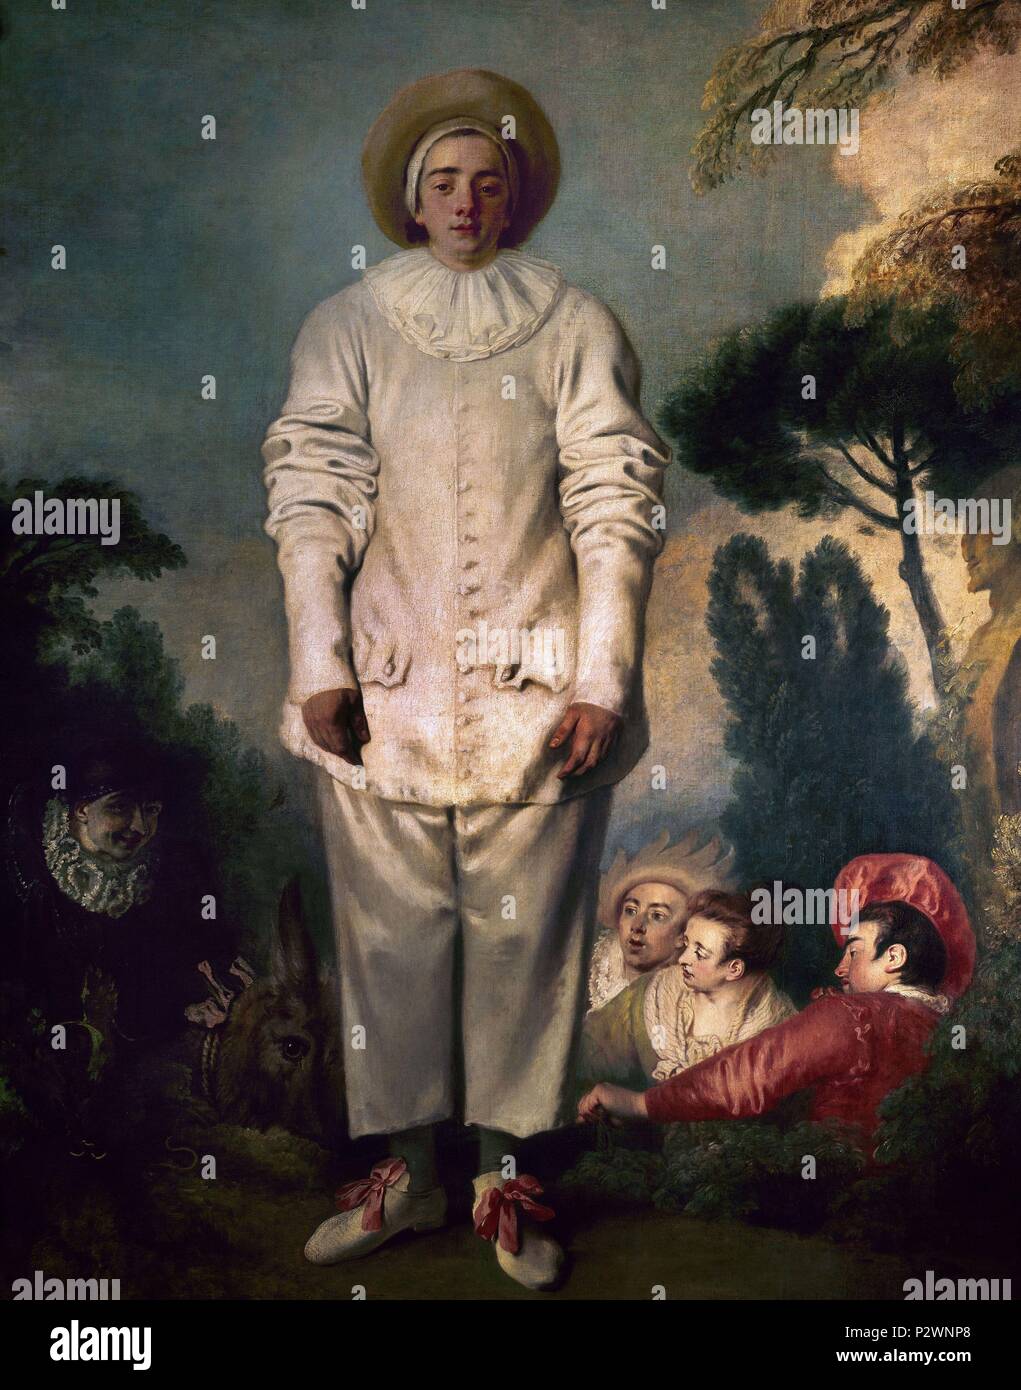 Gilles - ca. 1718-19 - 184,5x149, cm - oil on canvas. Author: Jean Antoine Watteau (1684-1721). Location: LOUVRE MUSEUM-PAINTINGS, FRANCE. Also known as: GILLES. Stock Photo